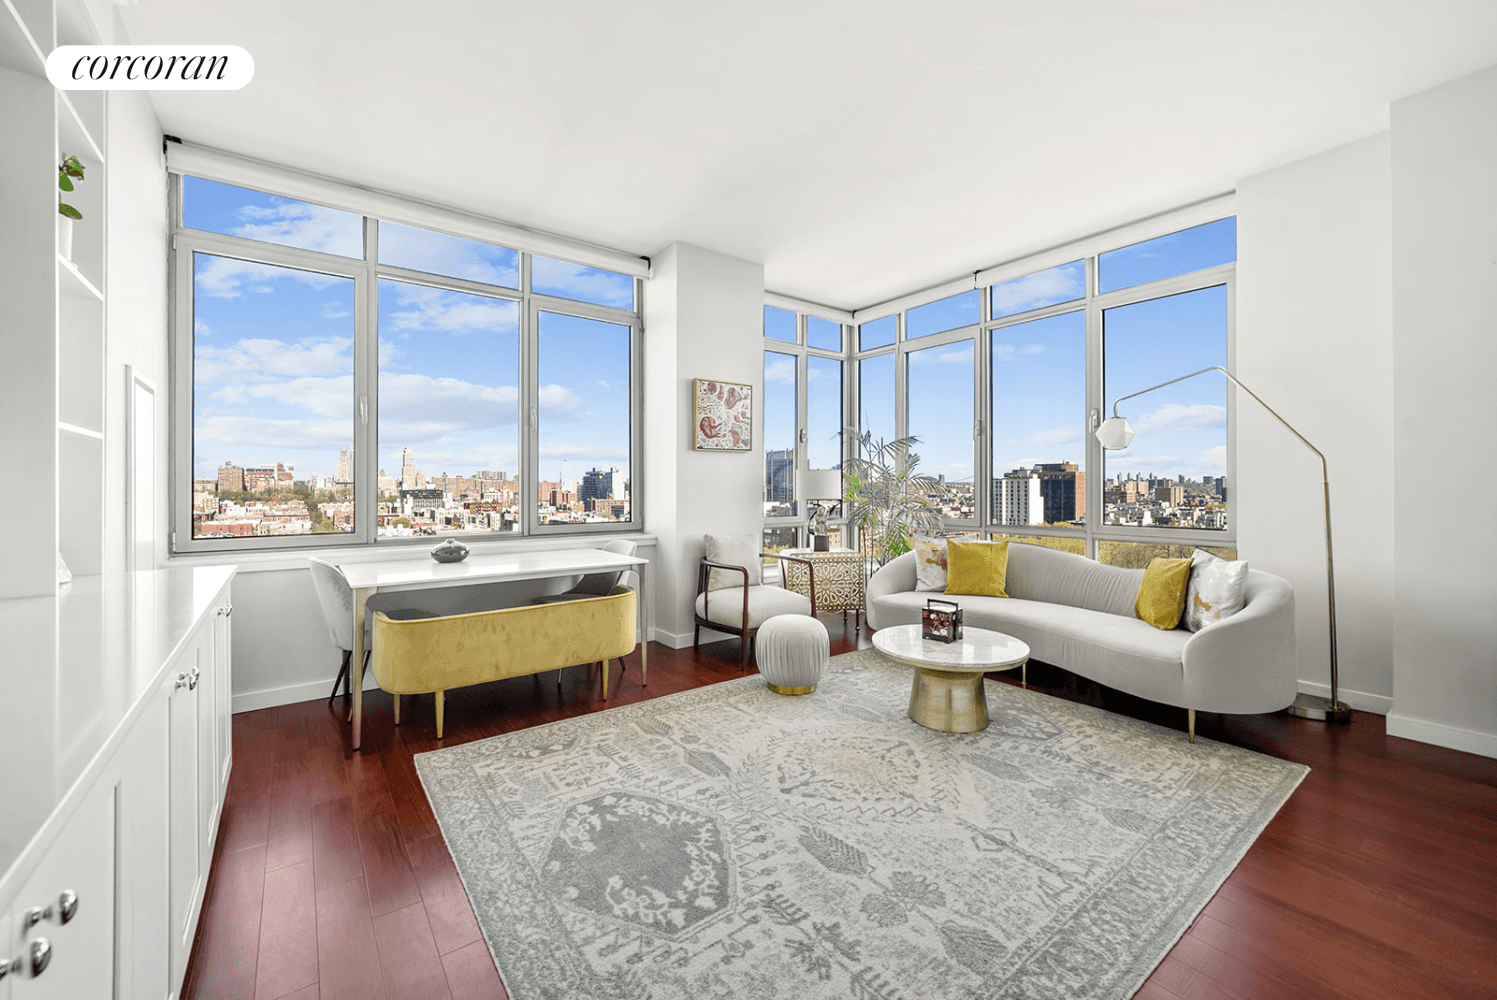 AVAILABLE OCT 15TH ! Welcome to your slice of urban paradise located in the heart of Harlem at 1485 Fifth Avenue.